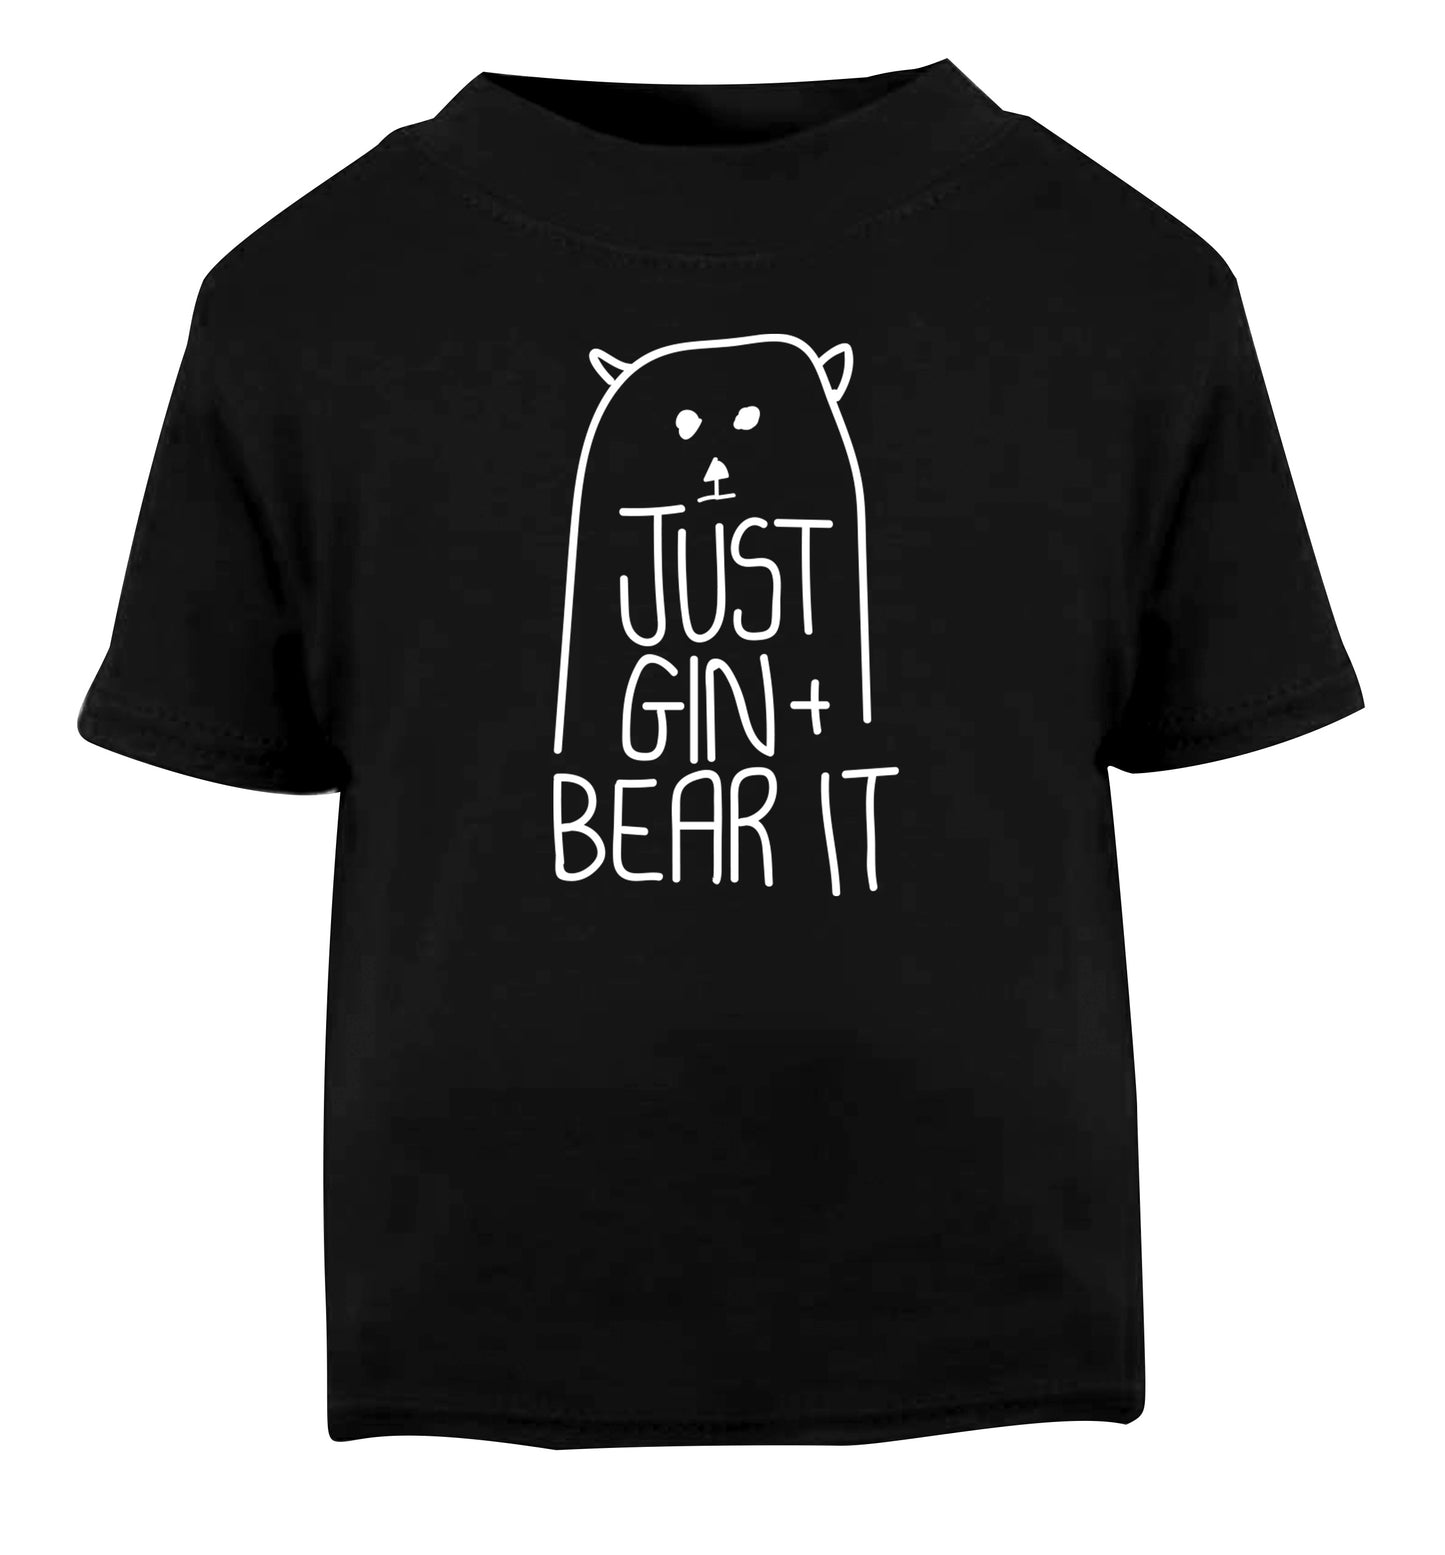 Just gin and bear it Black Baby Toddler Tshirt 2 years